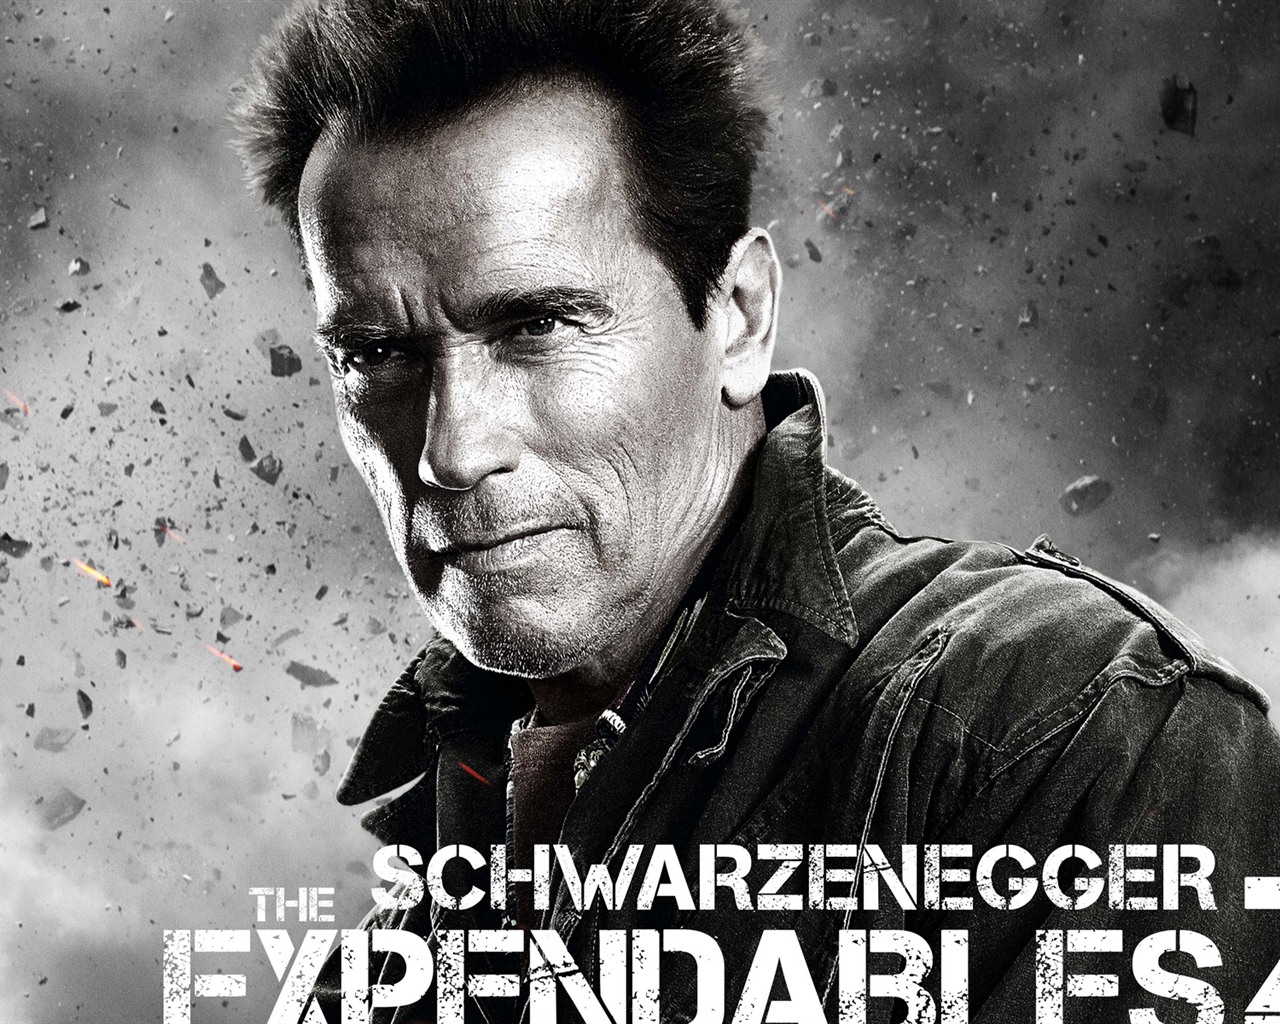 2012 The Expendables 2 HD Wallpaper #4 - 1280x1024